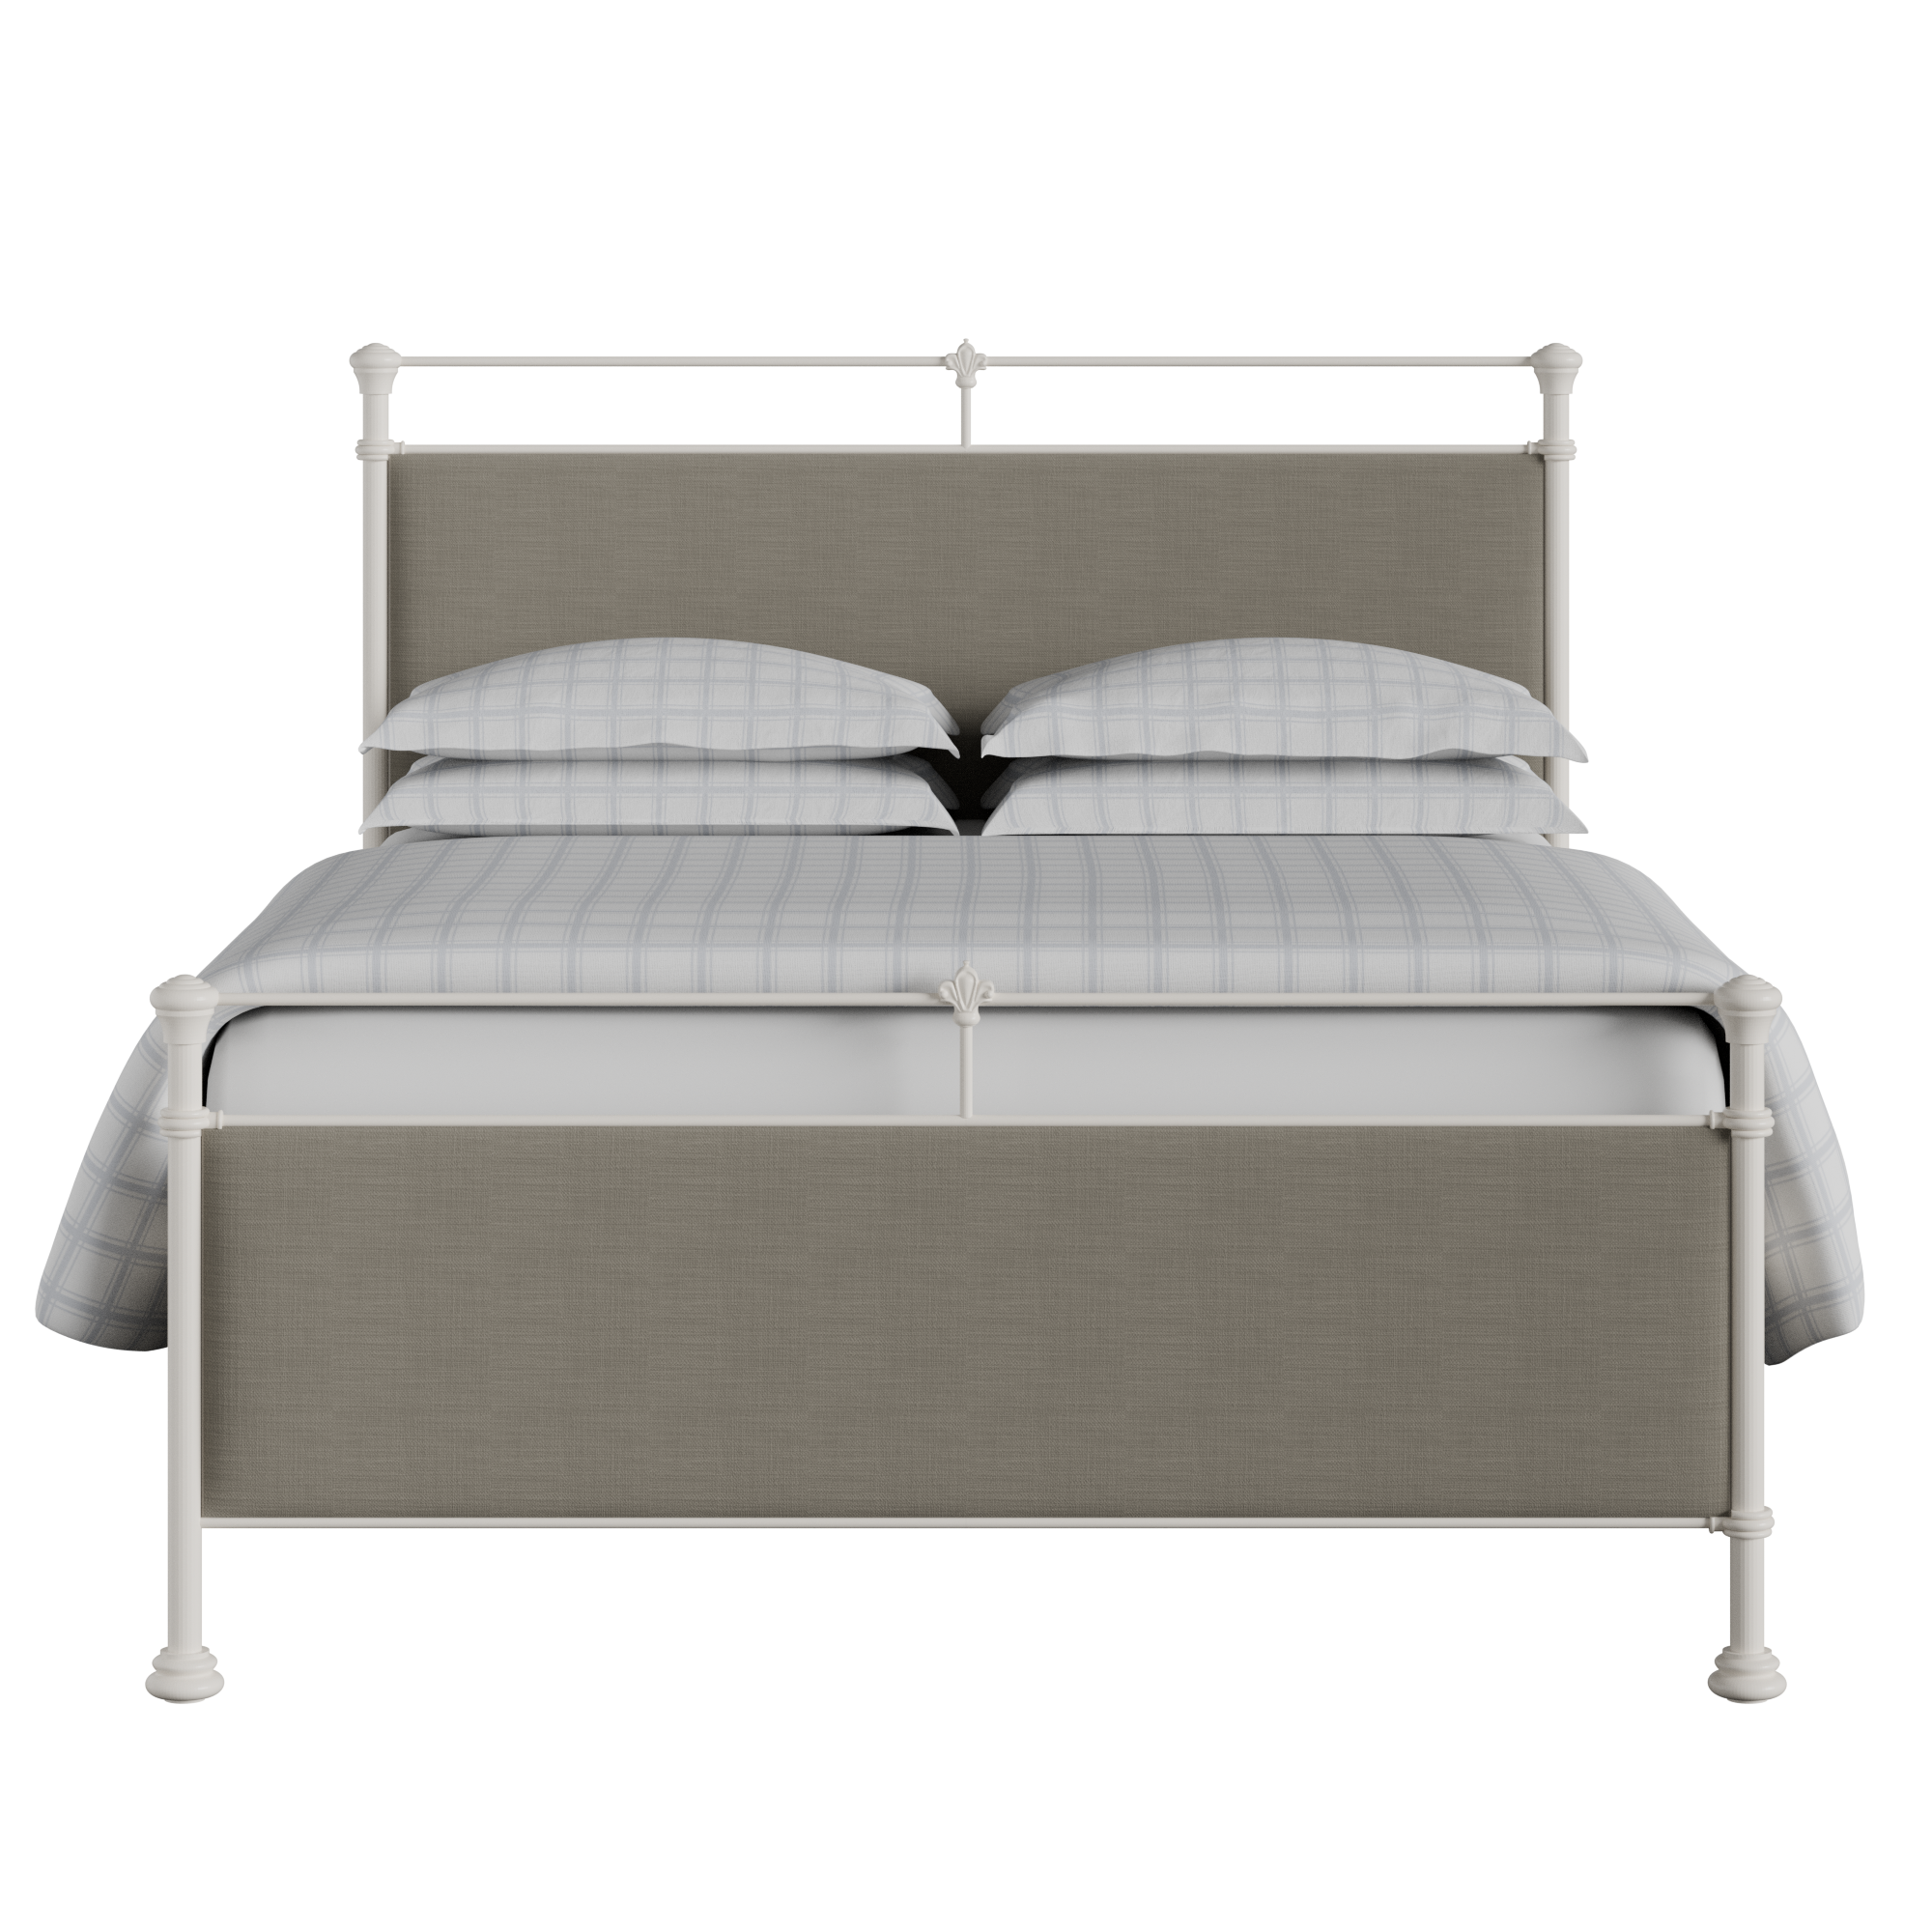 Nancy iron/metal upholstered bed in ivory with grey fabric